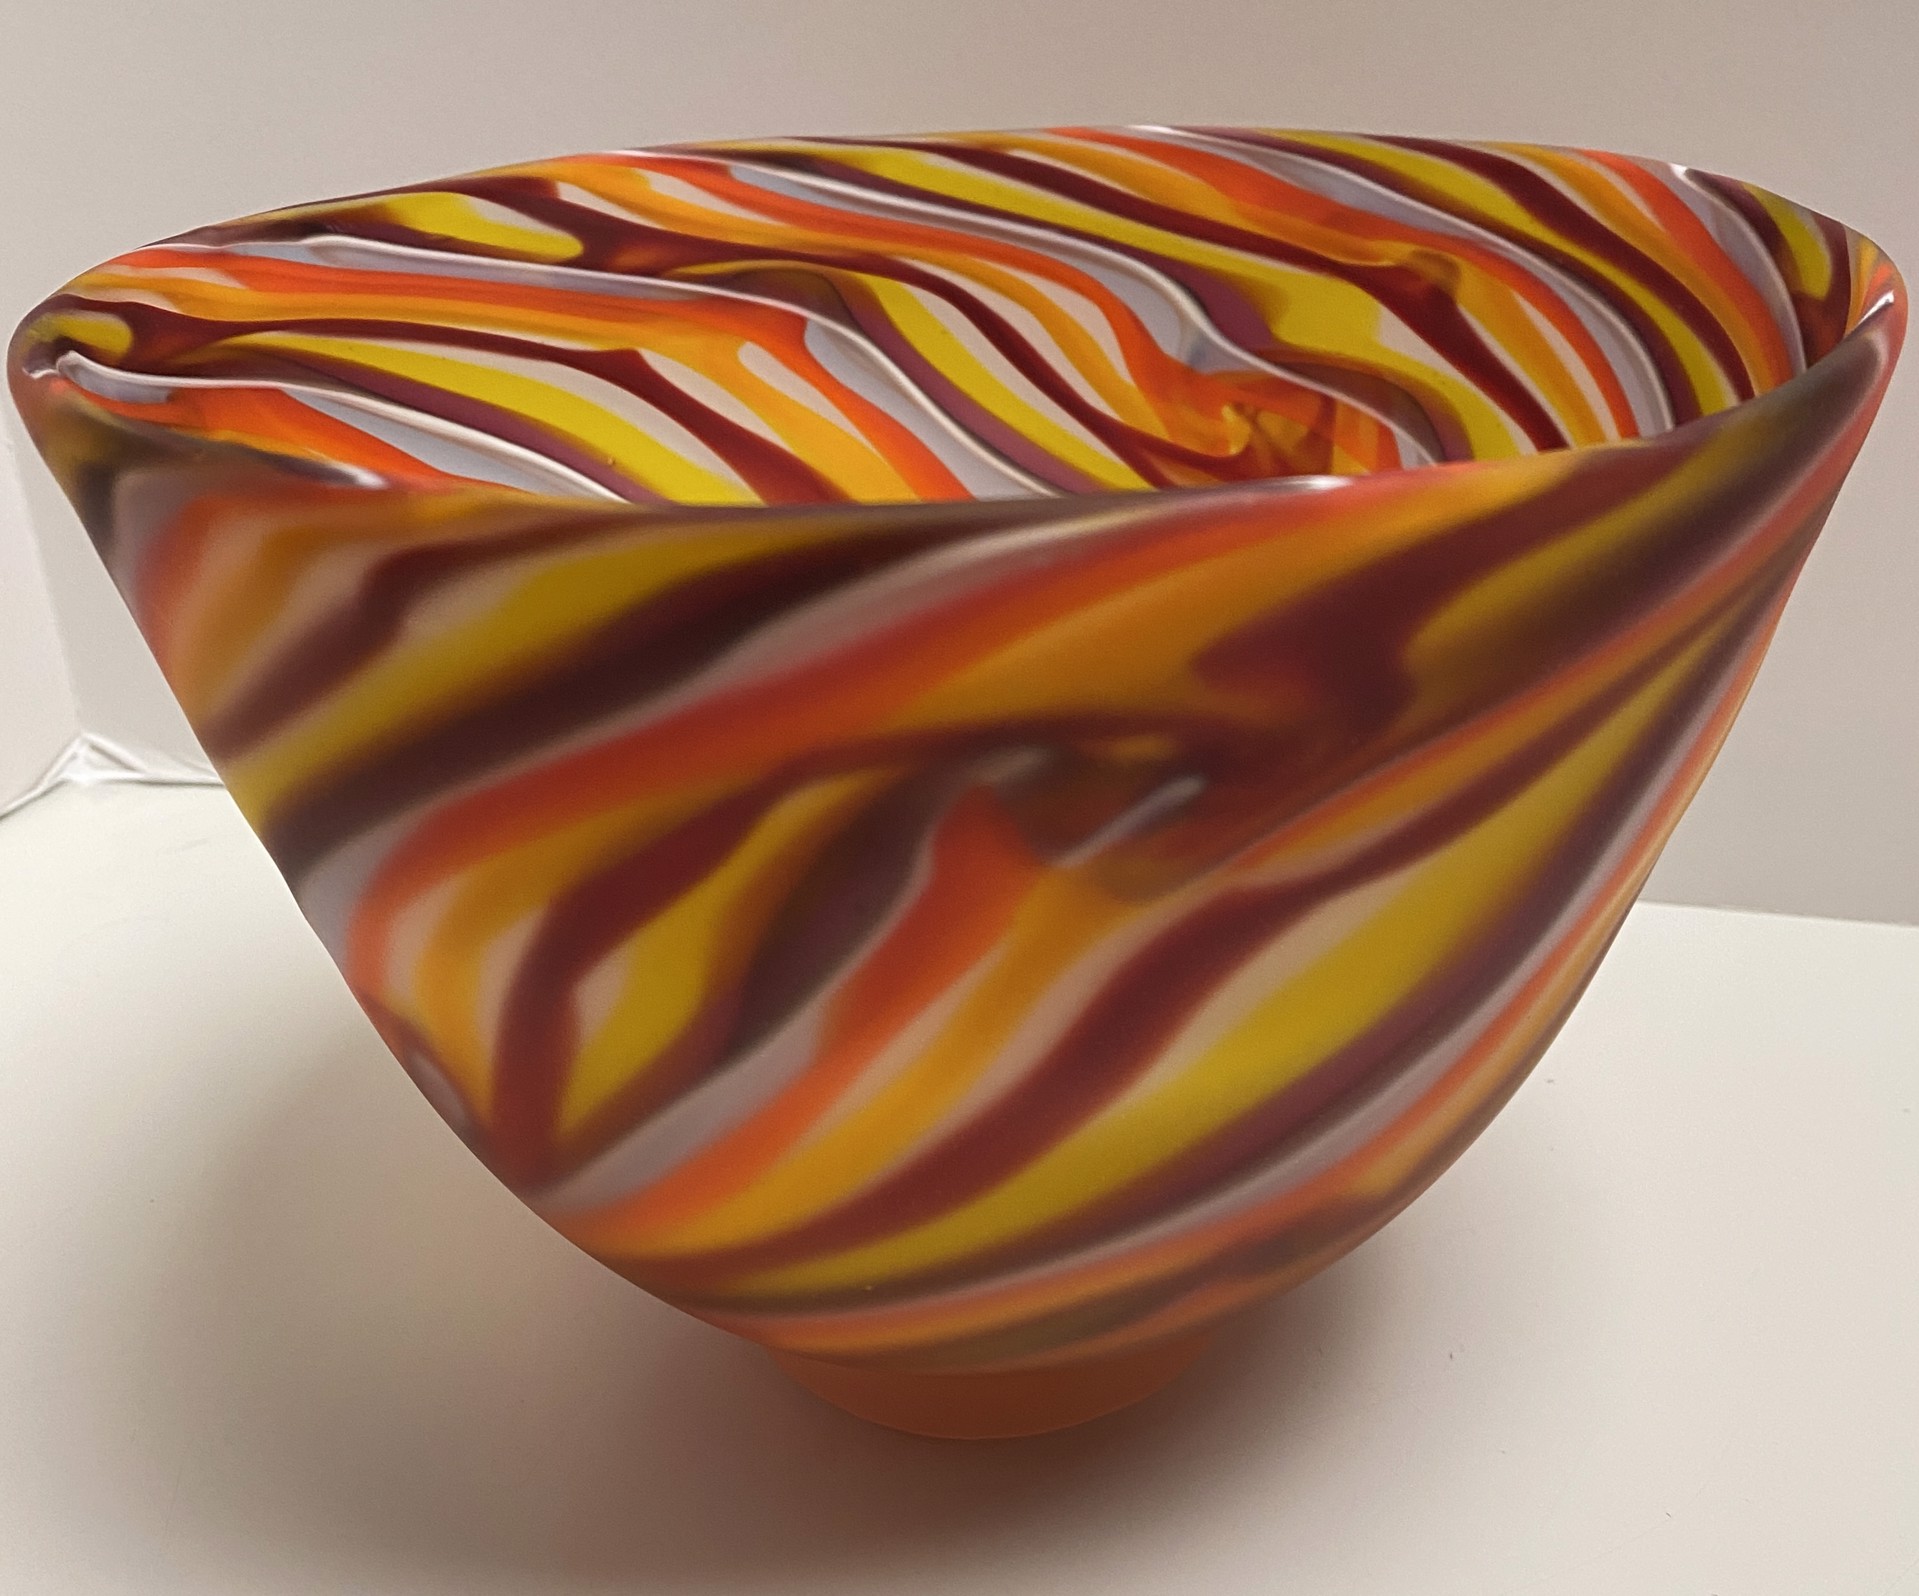 Smoke Red, Orange, Yellow Footed Bowl by Rene Culler